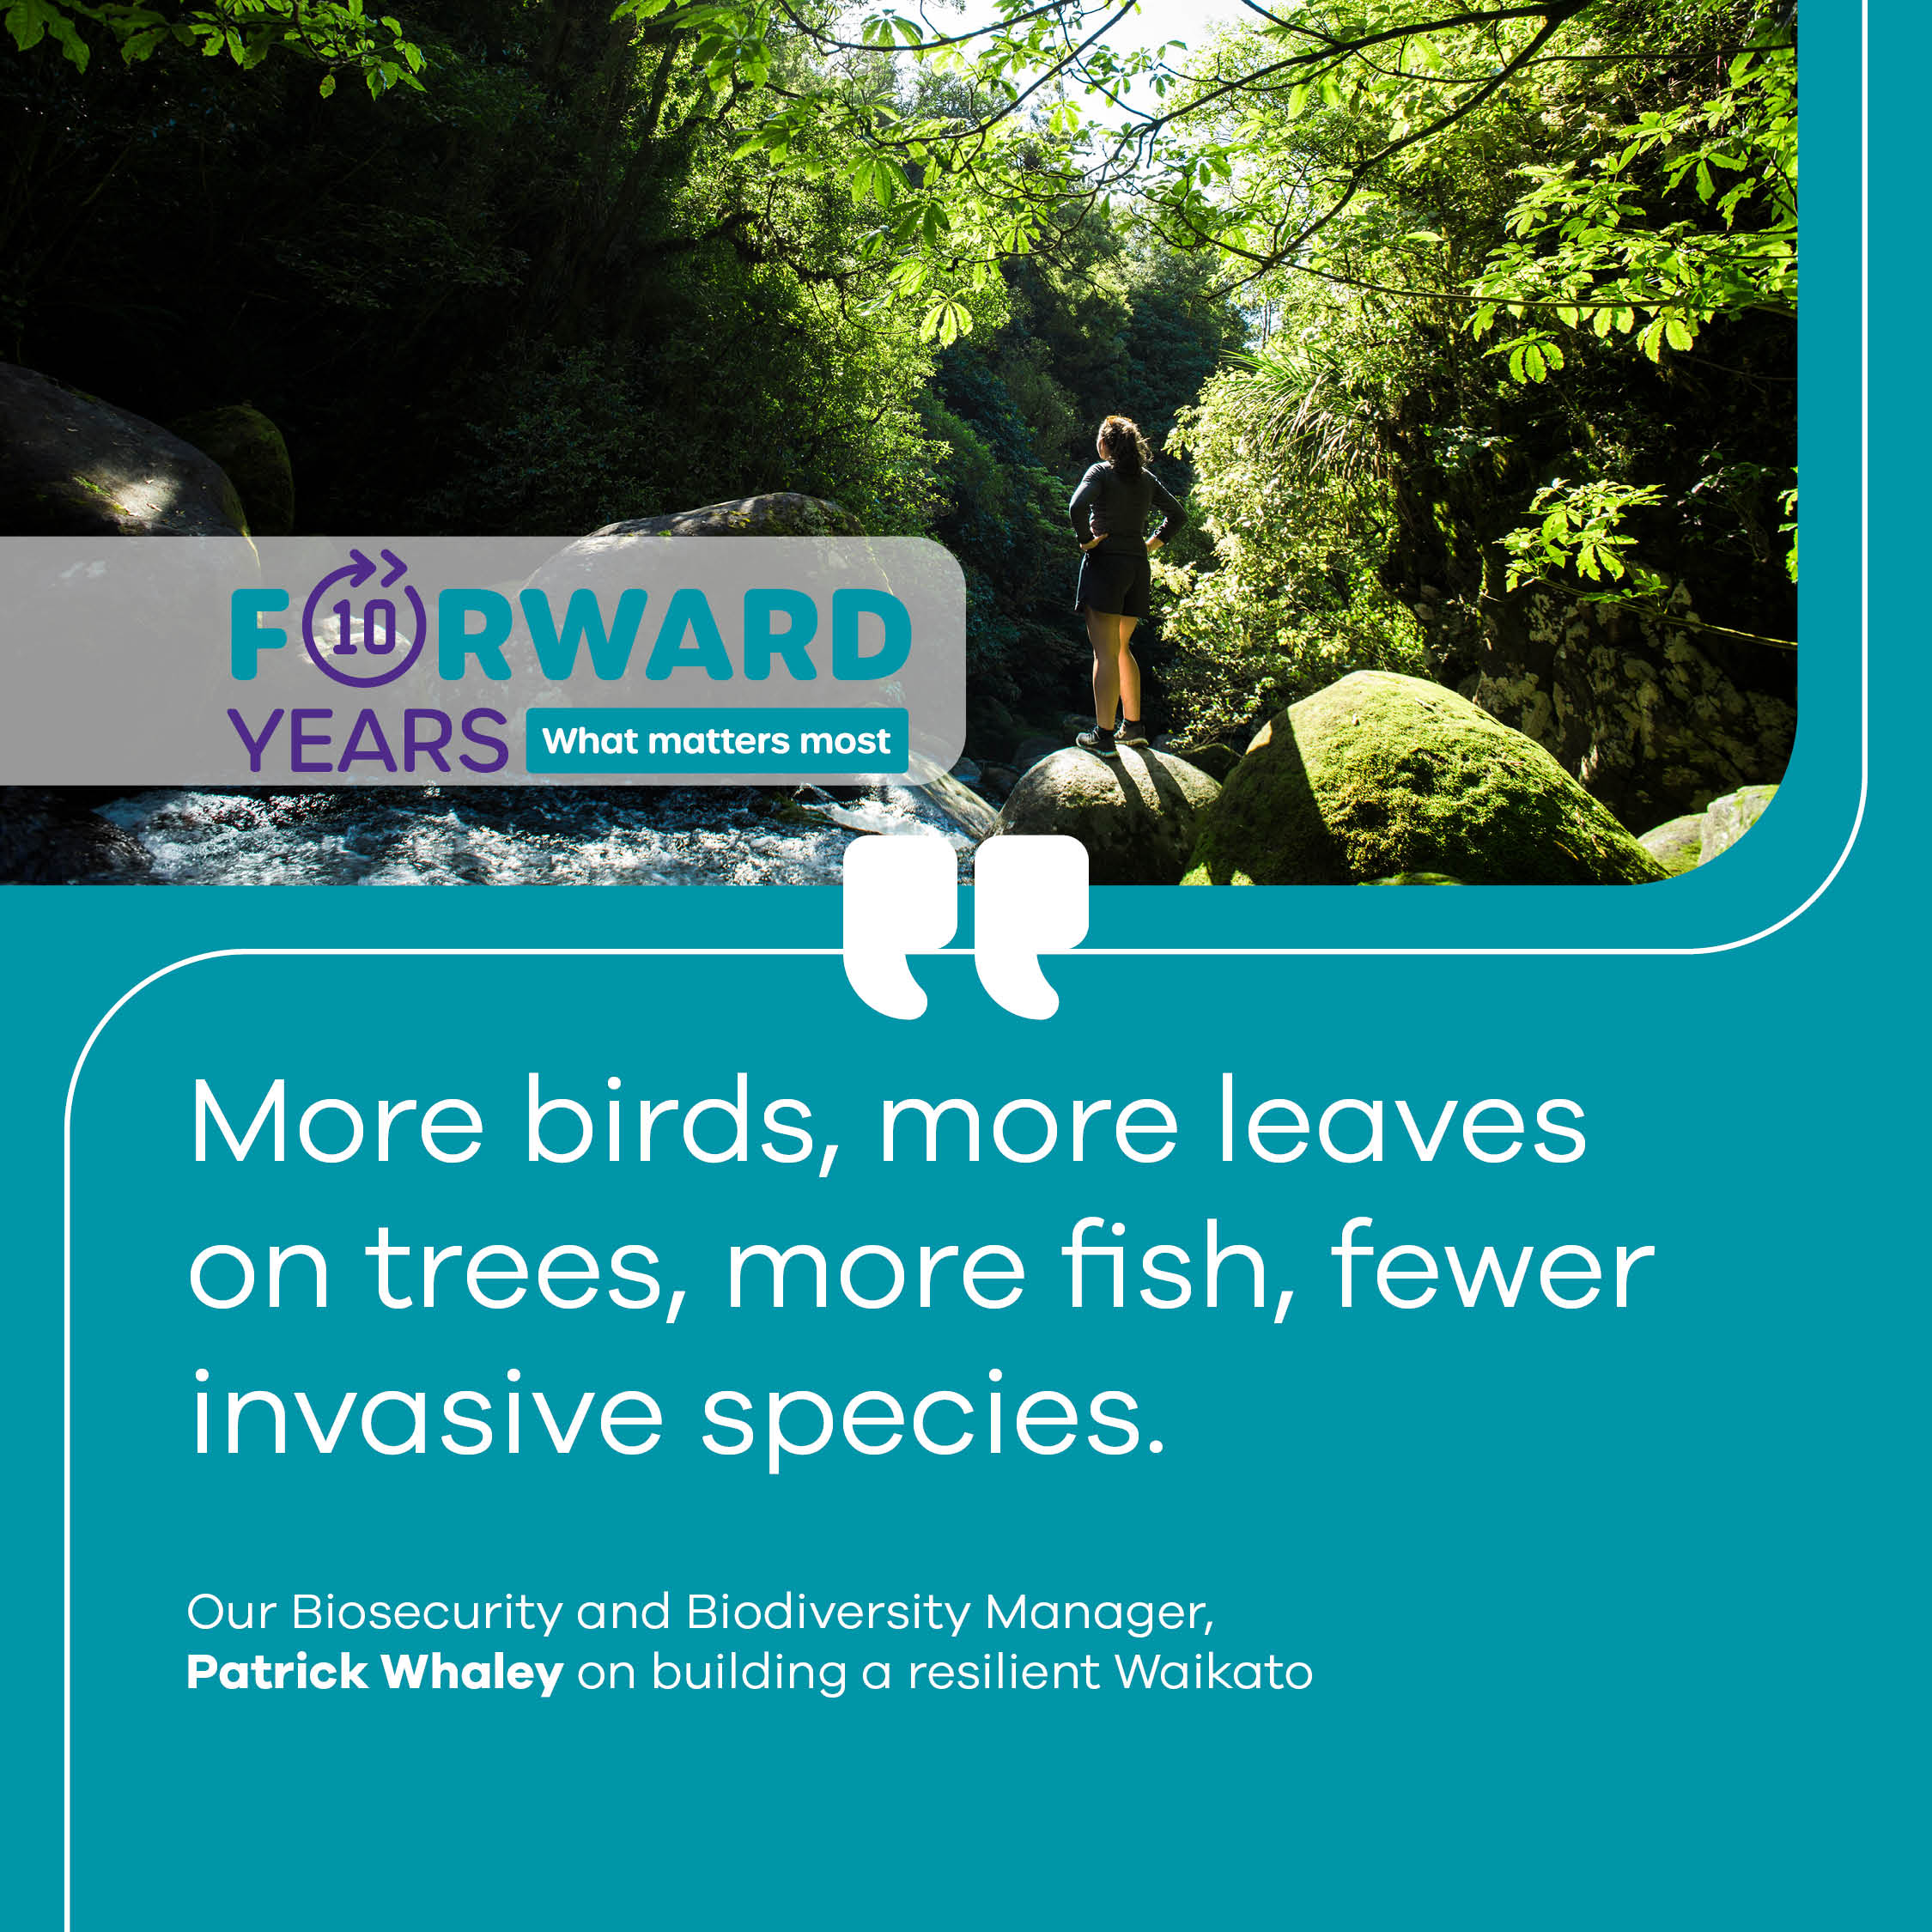 Image - LTP quote - Biodiversity and biosecurity